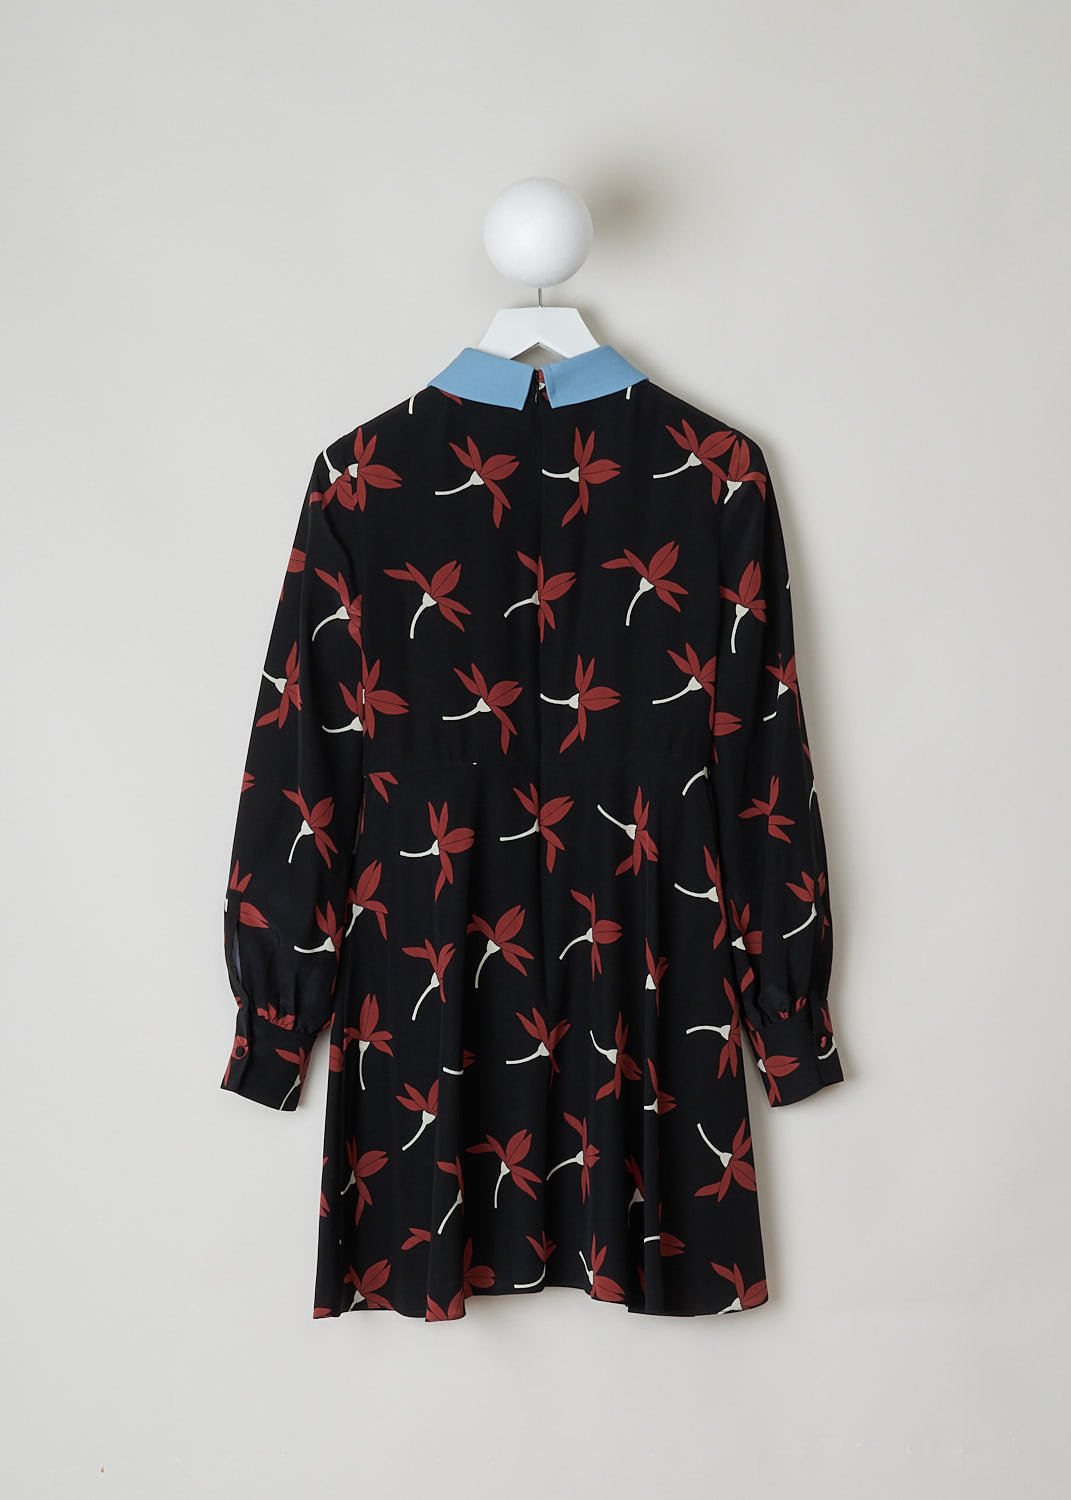 VALENTINO, BLACK PRINTED DRESS WITH BLUE FLORAL COLLAR, XB3VAXZ96UN_K92, Print, Back, This black long sleeve dress has a red and white flower print. Noteworthy is the contrasting blue floral collar. In the back, a concealed centre zipper can be found. 
